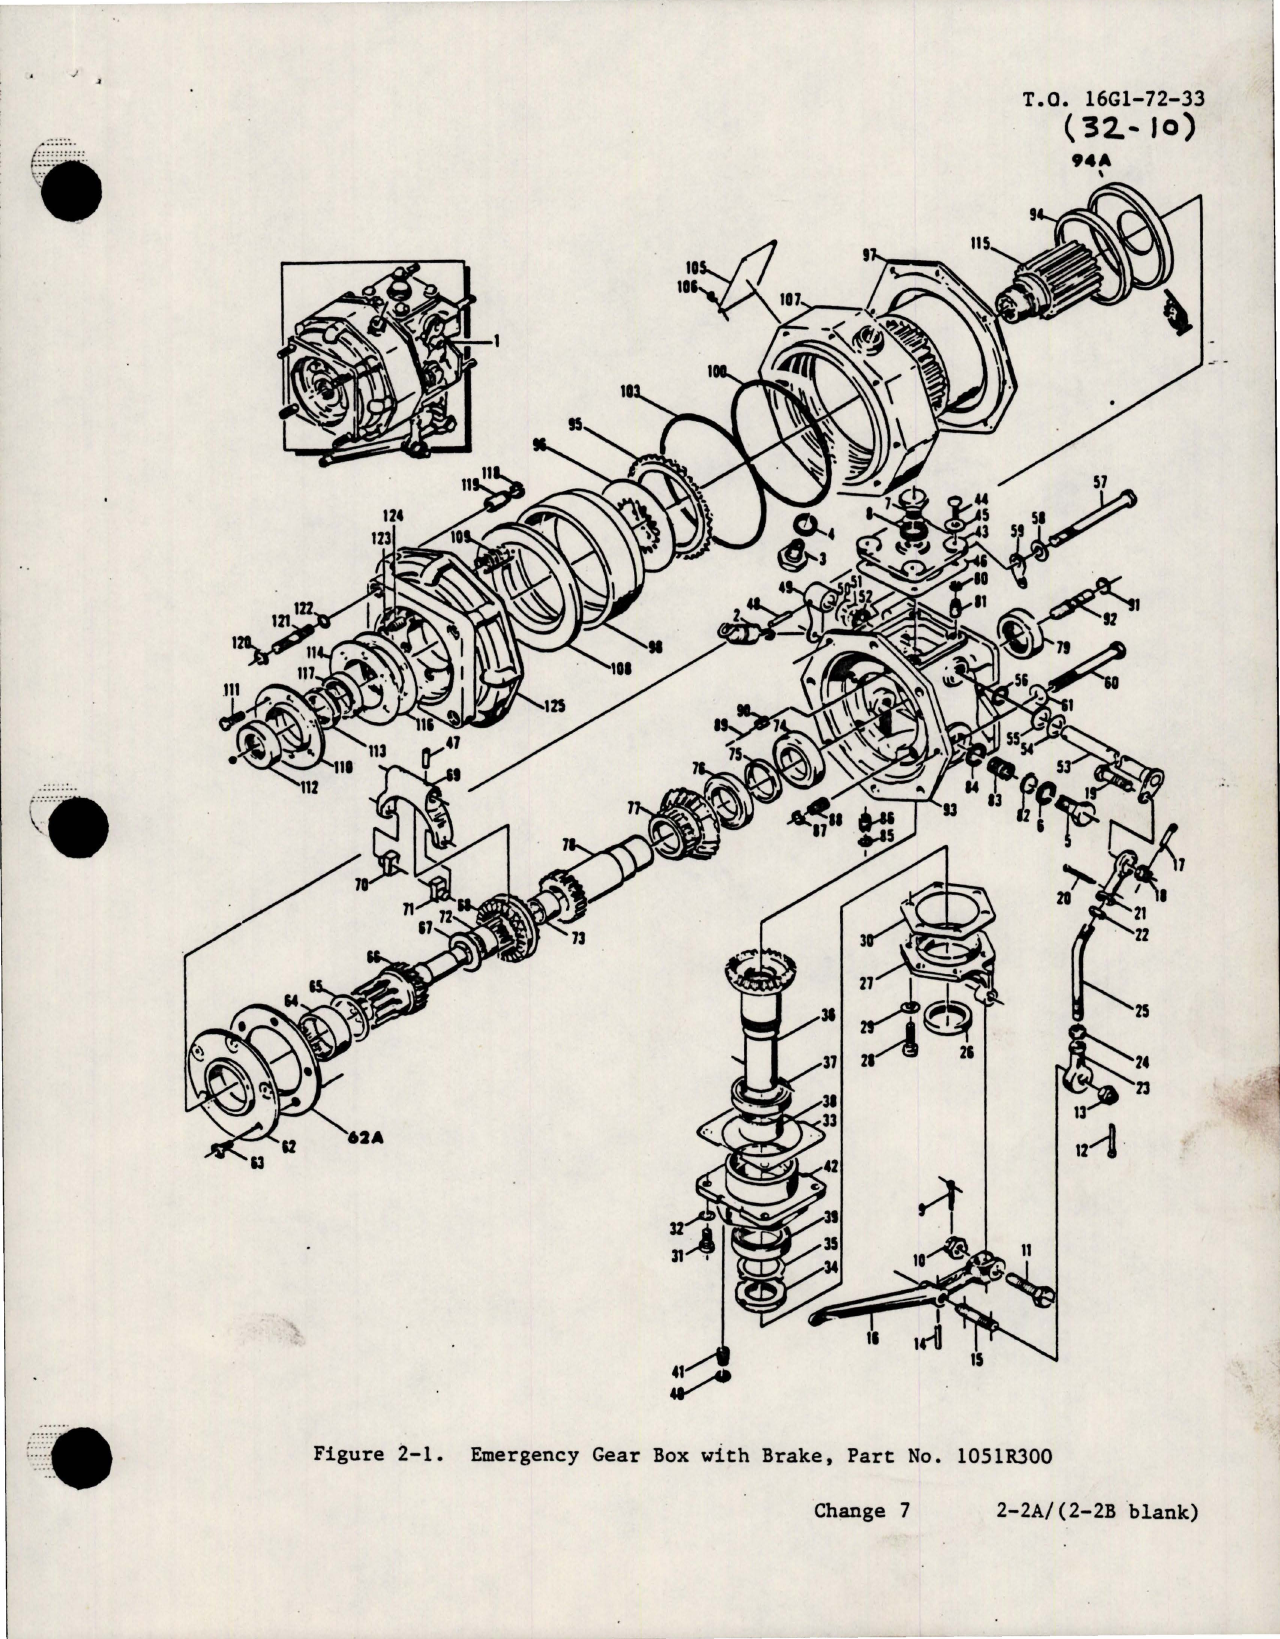 Sample page 9 from AirCorps Library document: Overhaul for Emergency Gear Box with Brake - Parts 1051R228, 1051R274, 1051R268 and 1051R300